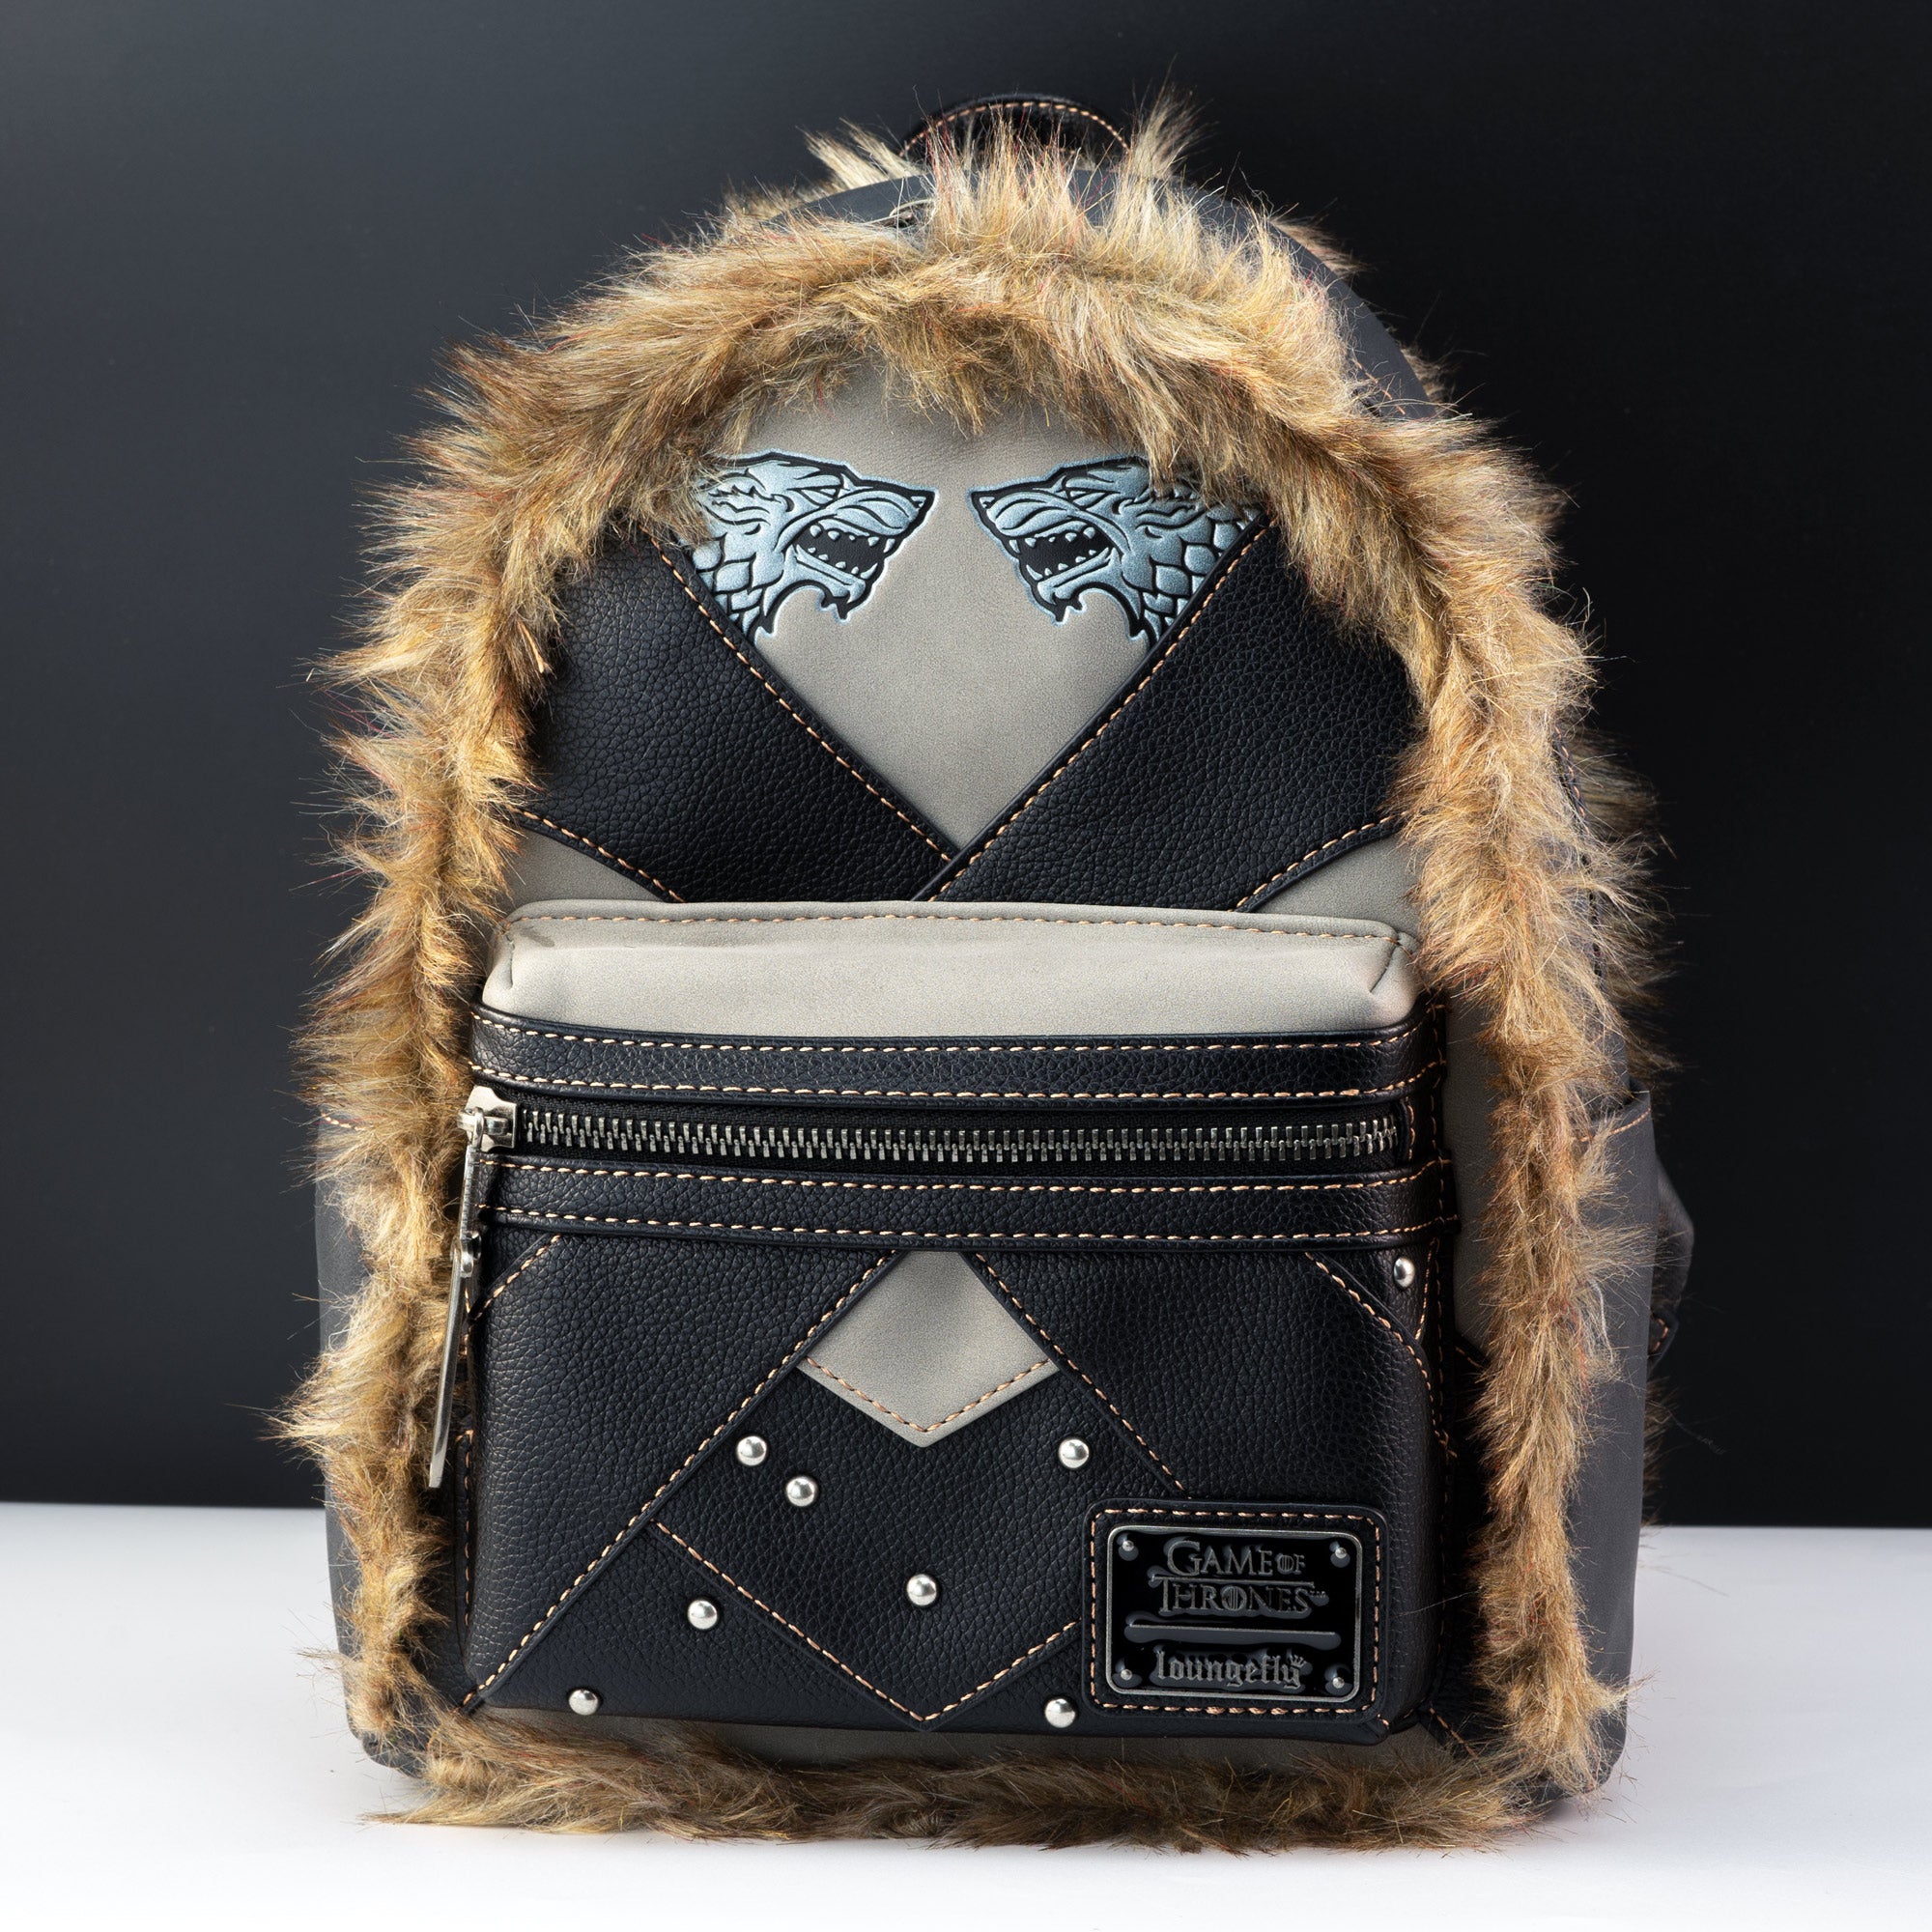 Loungefly x Game of Thrones Jon Snow Cosplay Mini Backpack